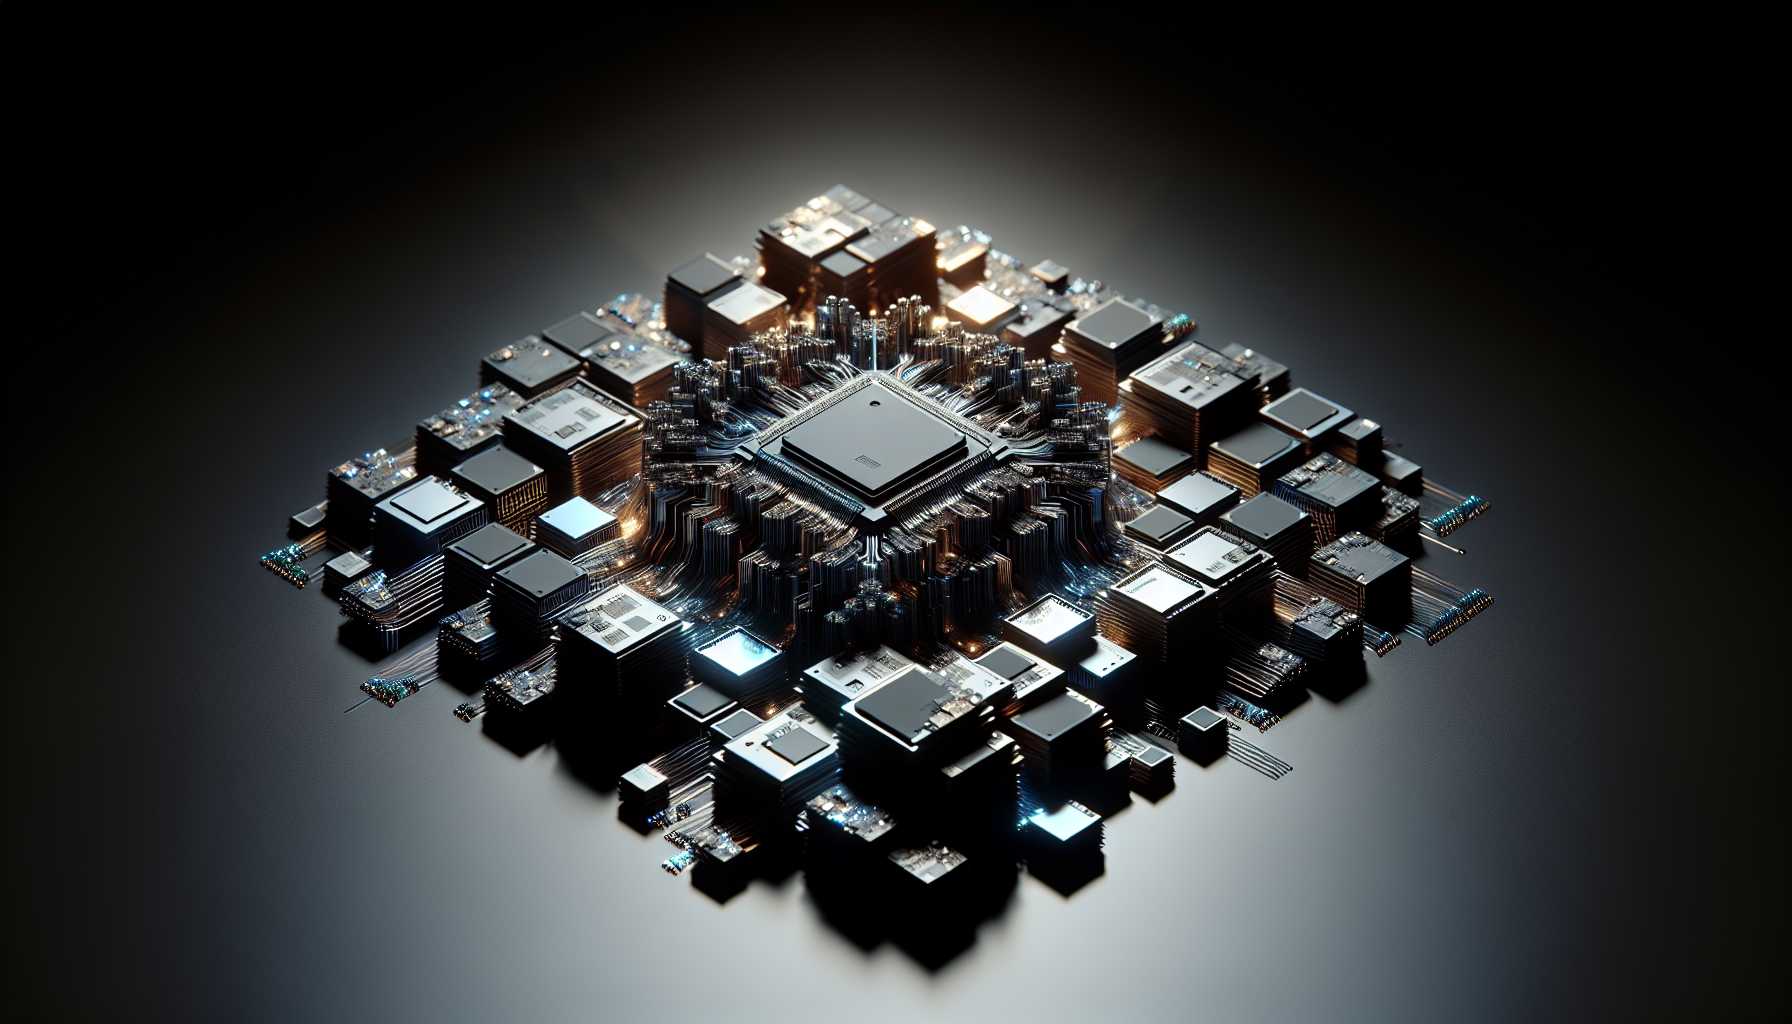 silicon semiconductor chips arranged dramatically, symbolizing Nvidia's influence in tech